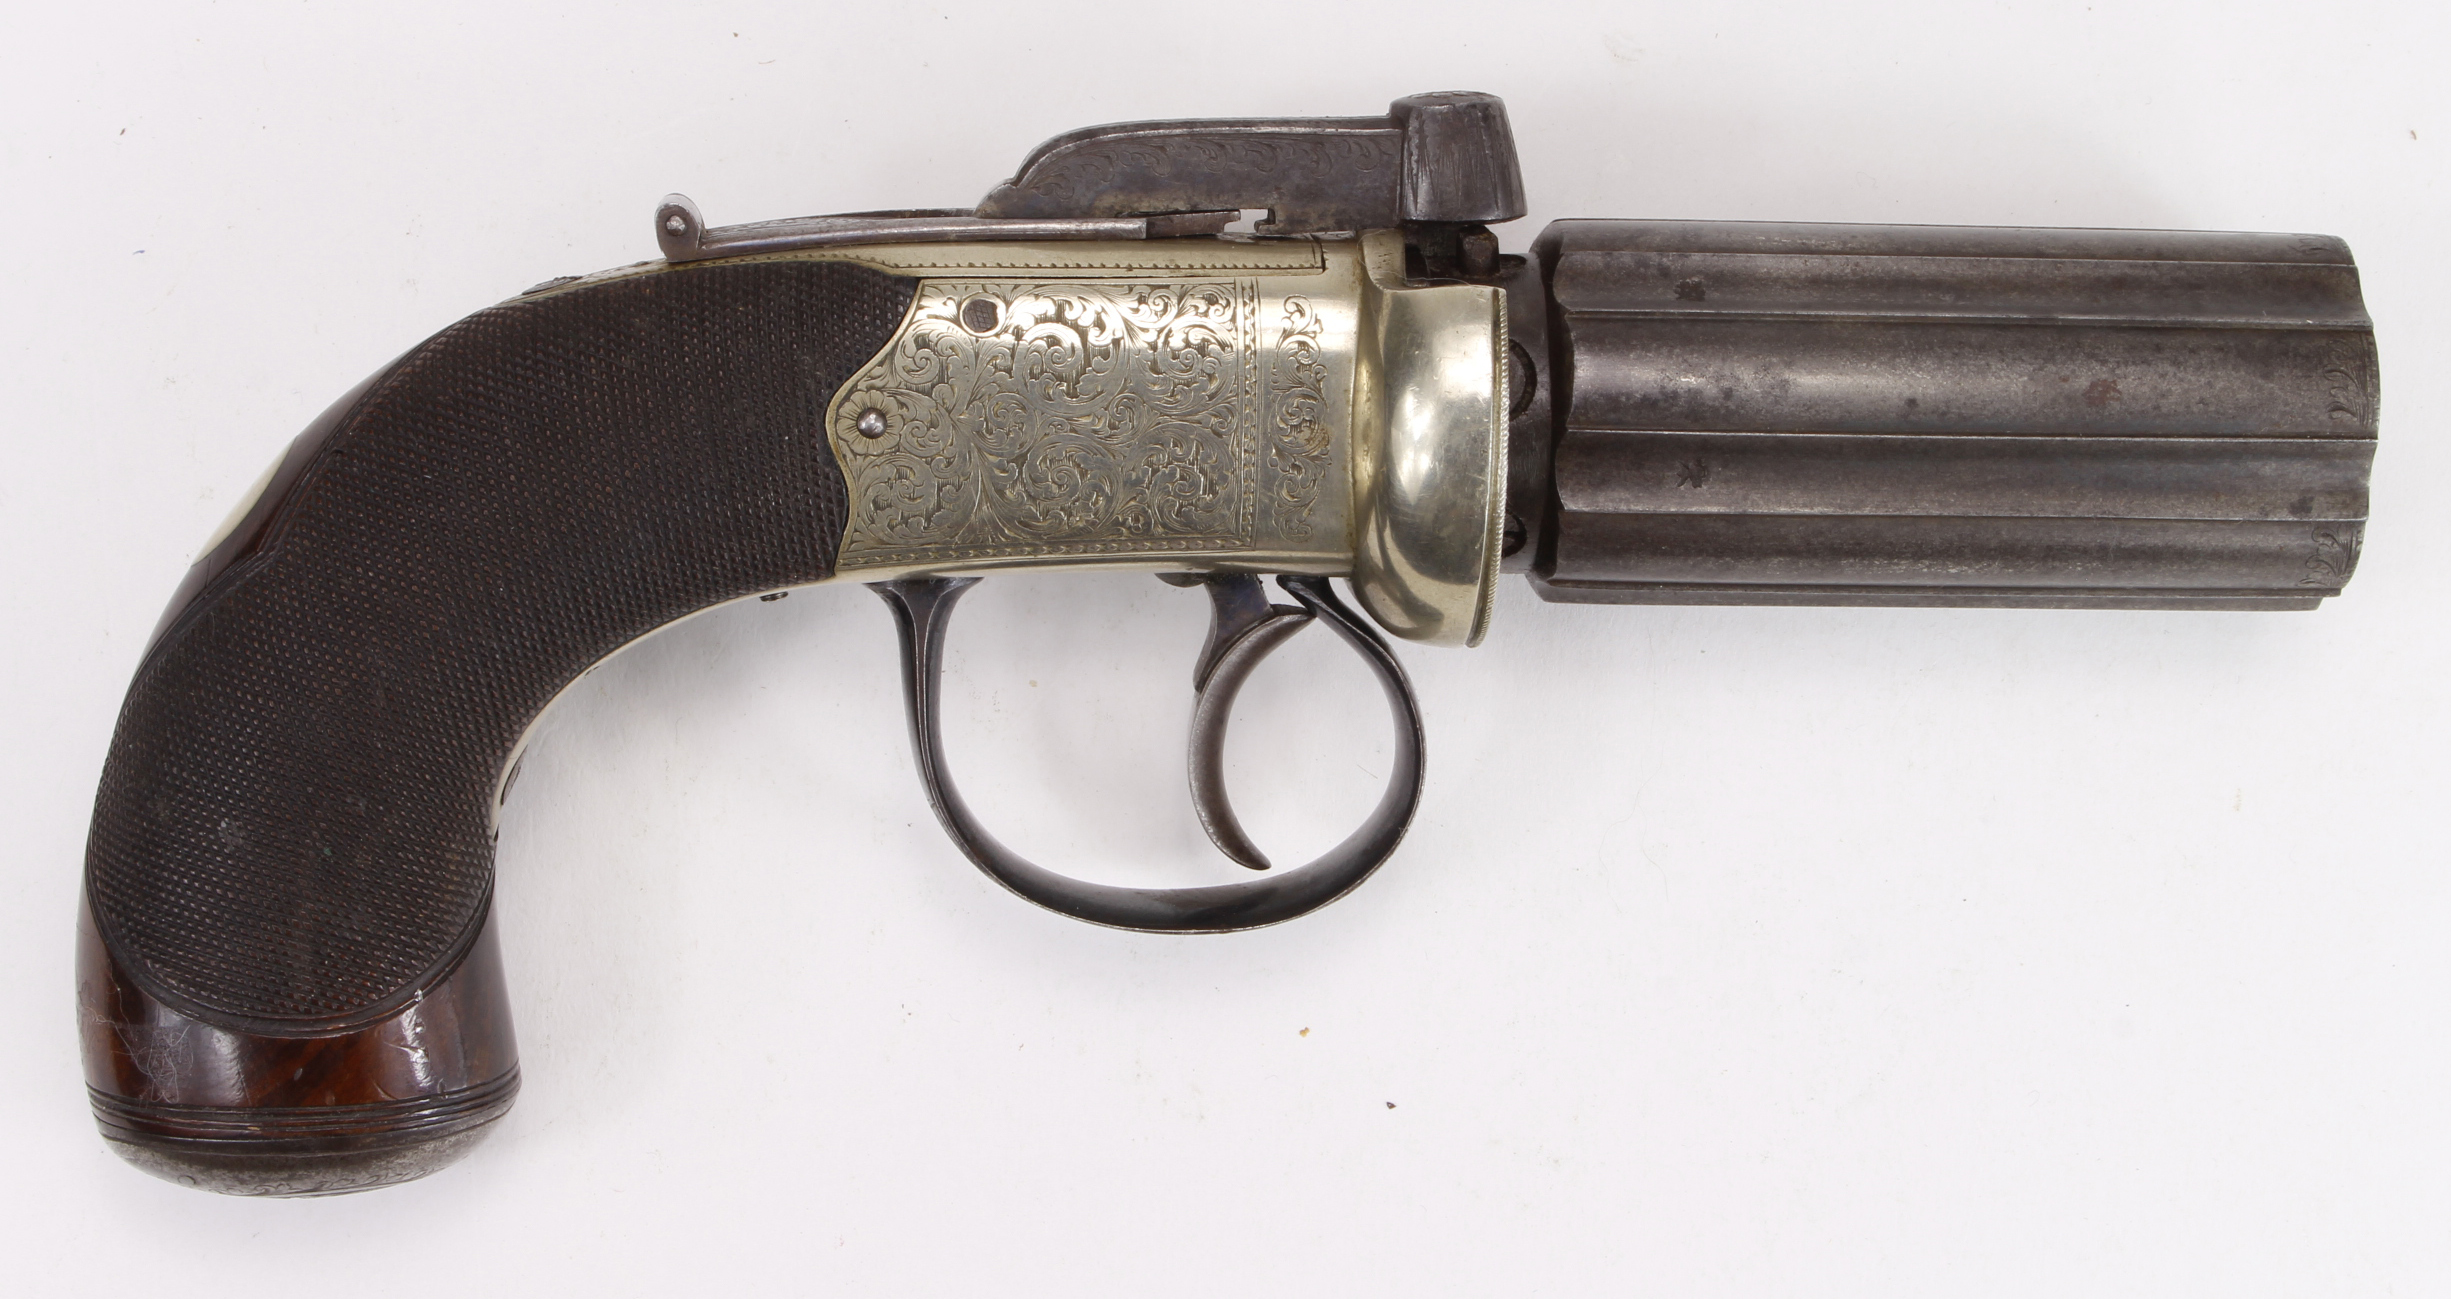 Fine English Pepperbox Revolver by Marrison of Norwich. Six shot revolving 3" barrel, approx .34